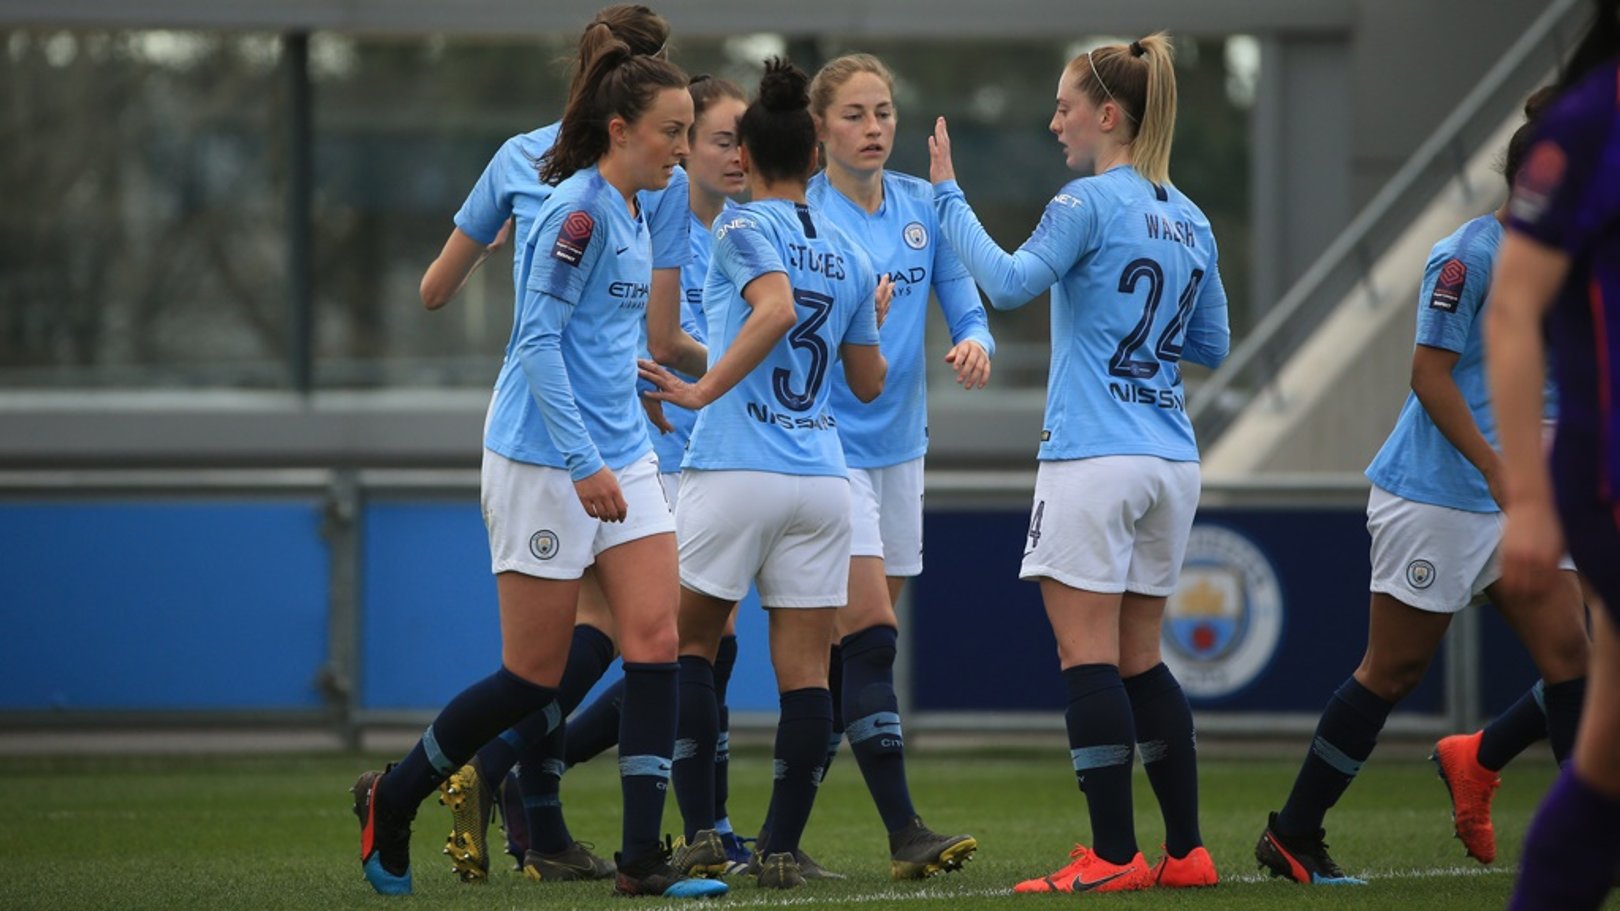 City to face Chelsea in FA Women's Cup semi-final